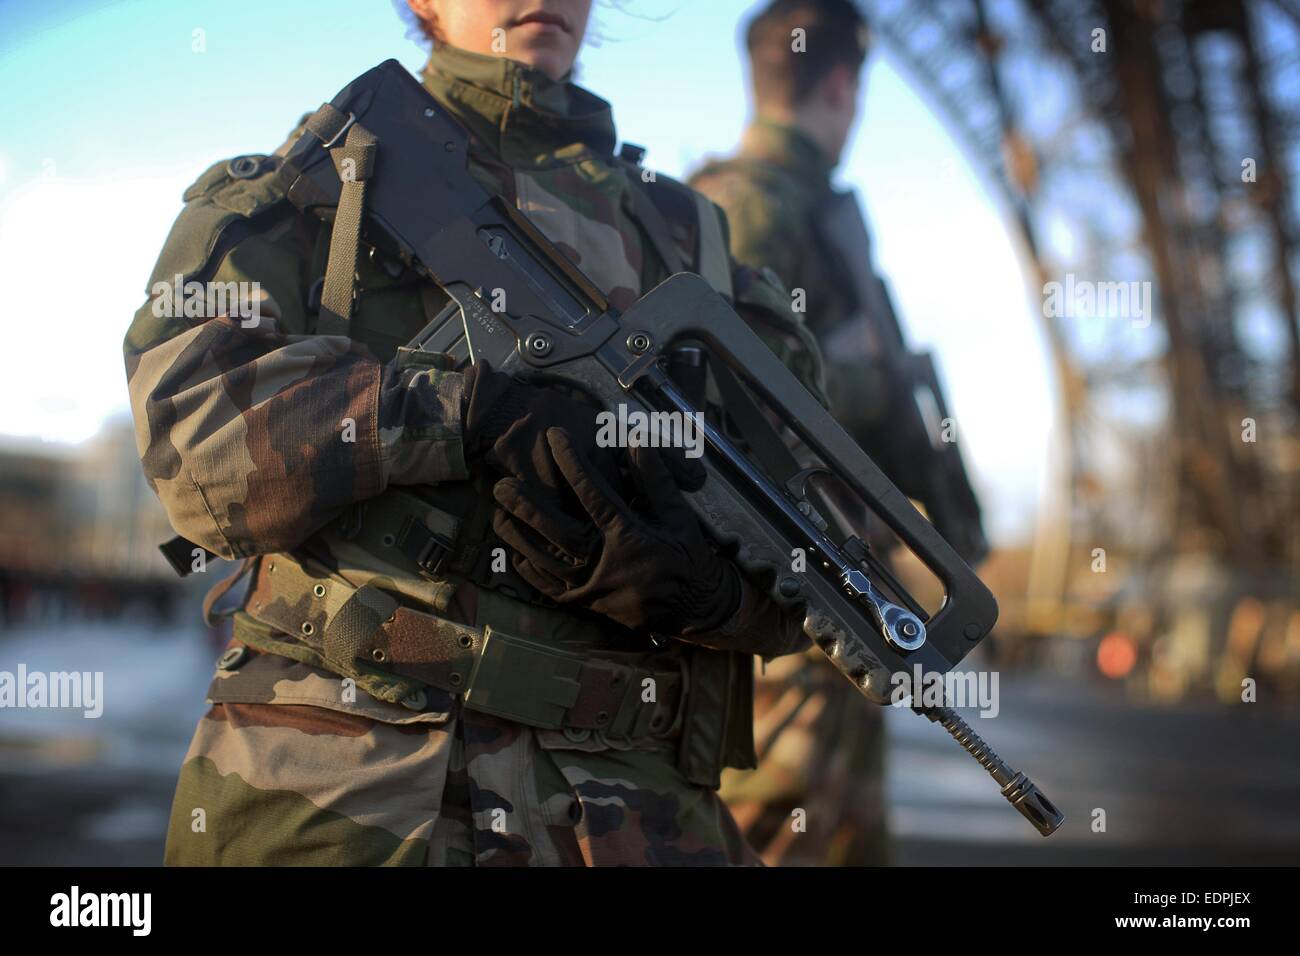 Paris, France. 8th Jan, 2015. Heavily armored soldiers guard the Eiffel Tower in Paris, France, 8 January 2015. PHOTO: Fredrik von Erichsen/dpa/Alamy Live News Stock Photo